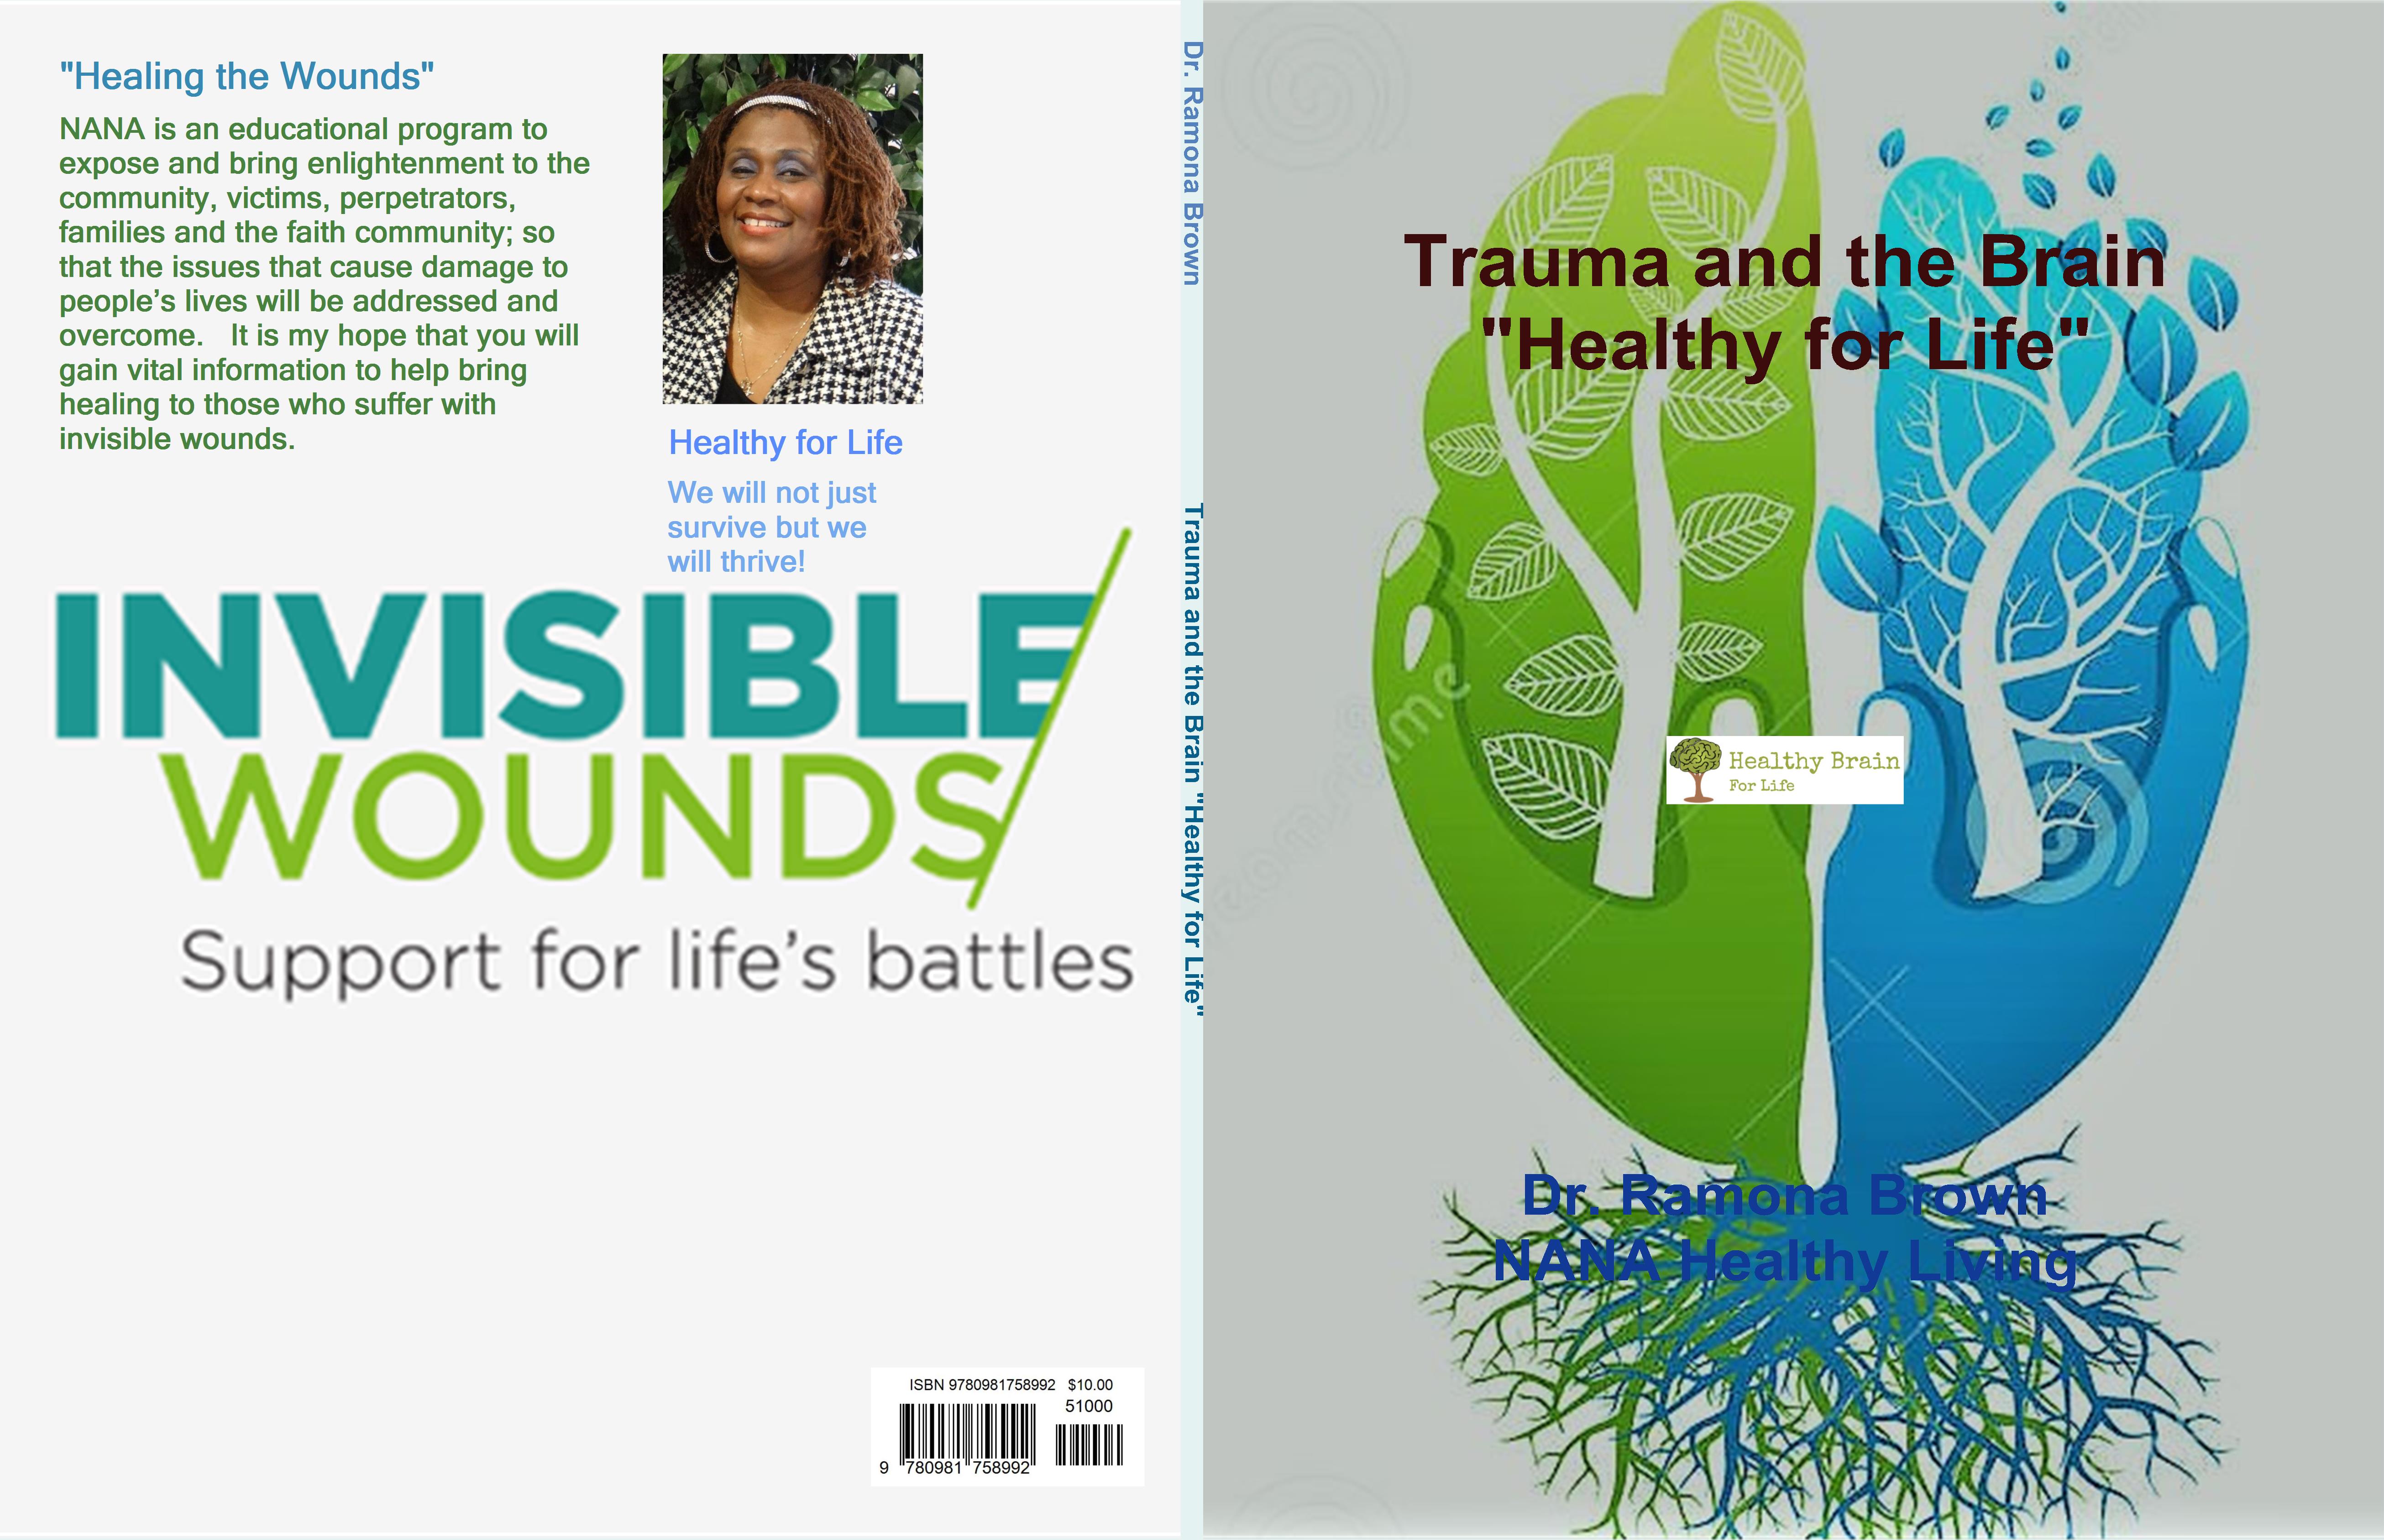 Trauma and the Brain "Healthy for Life" cover image